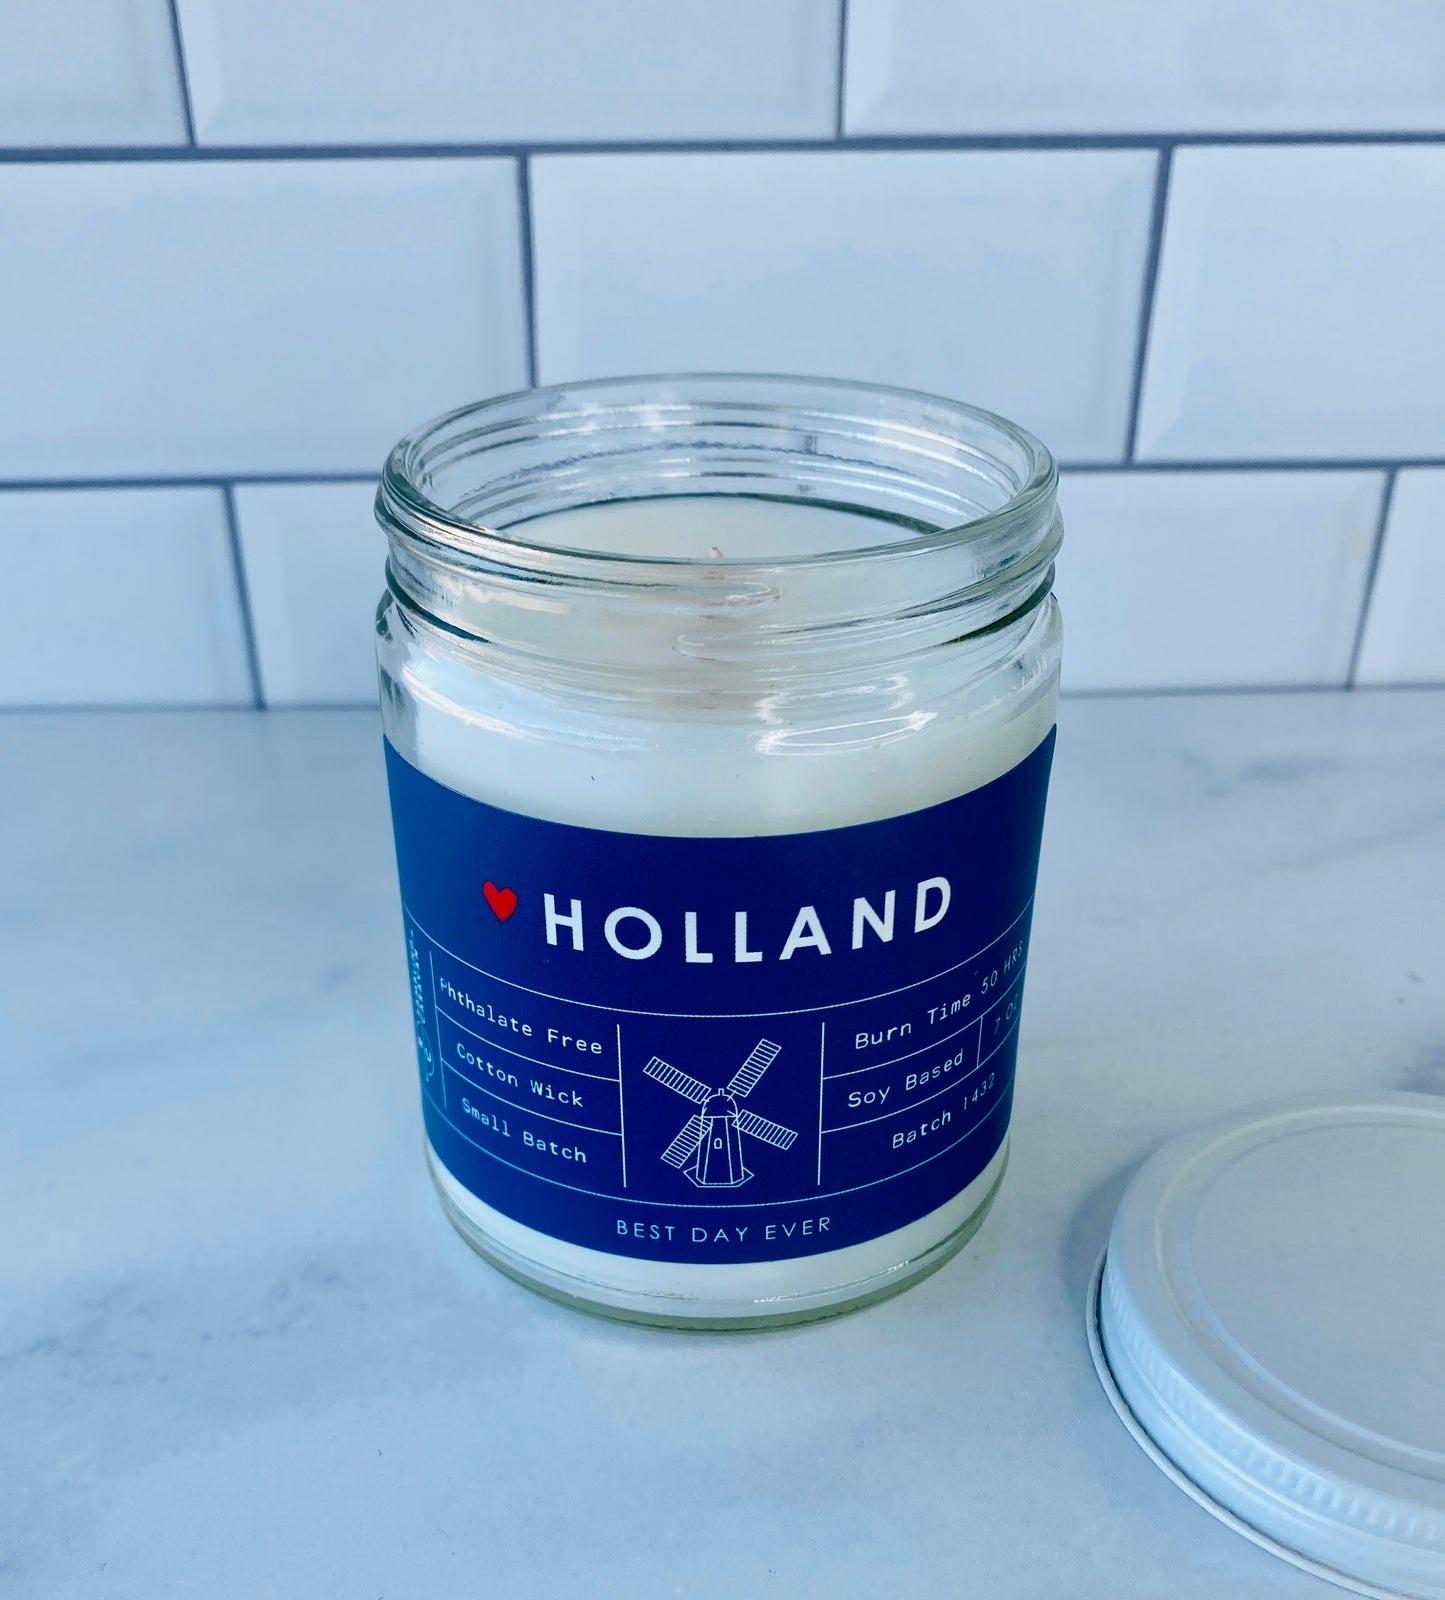 Holland Candle